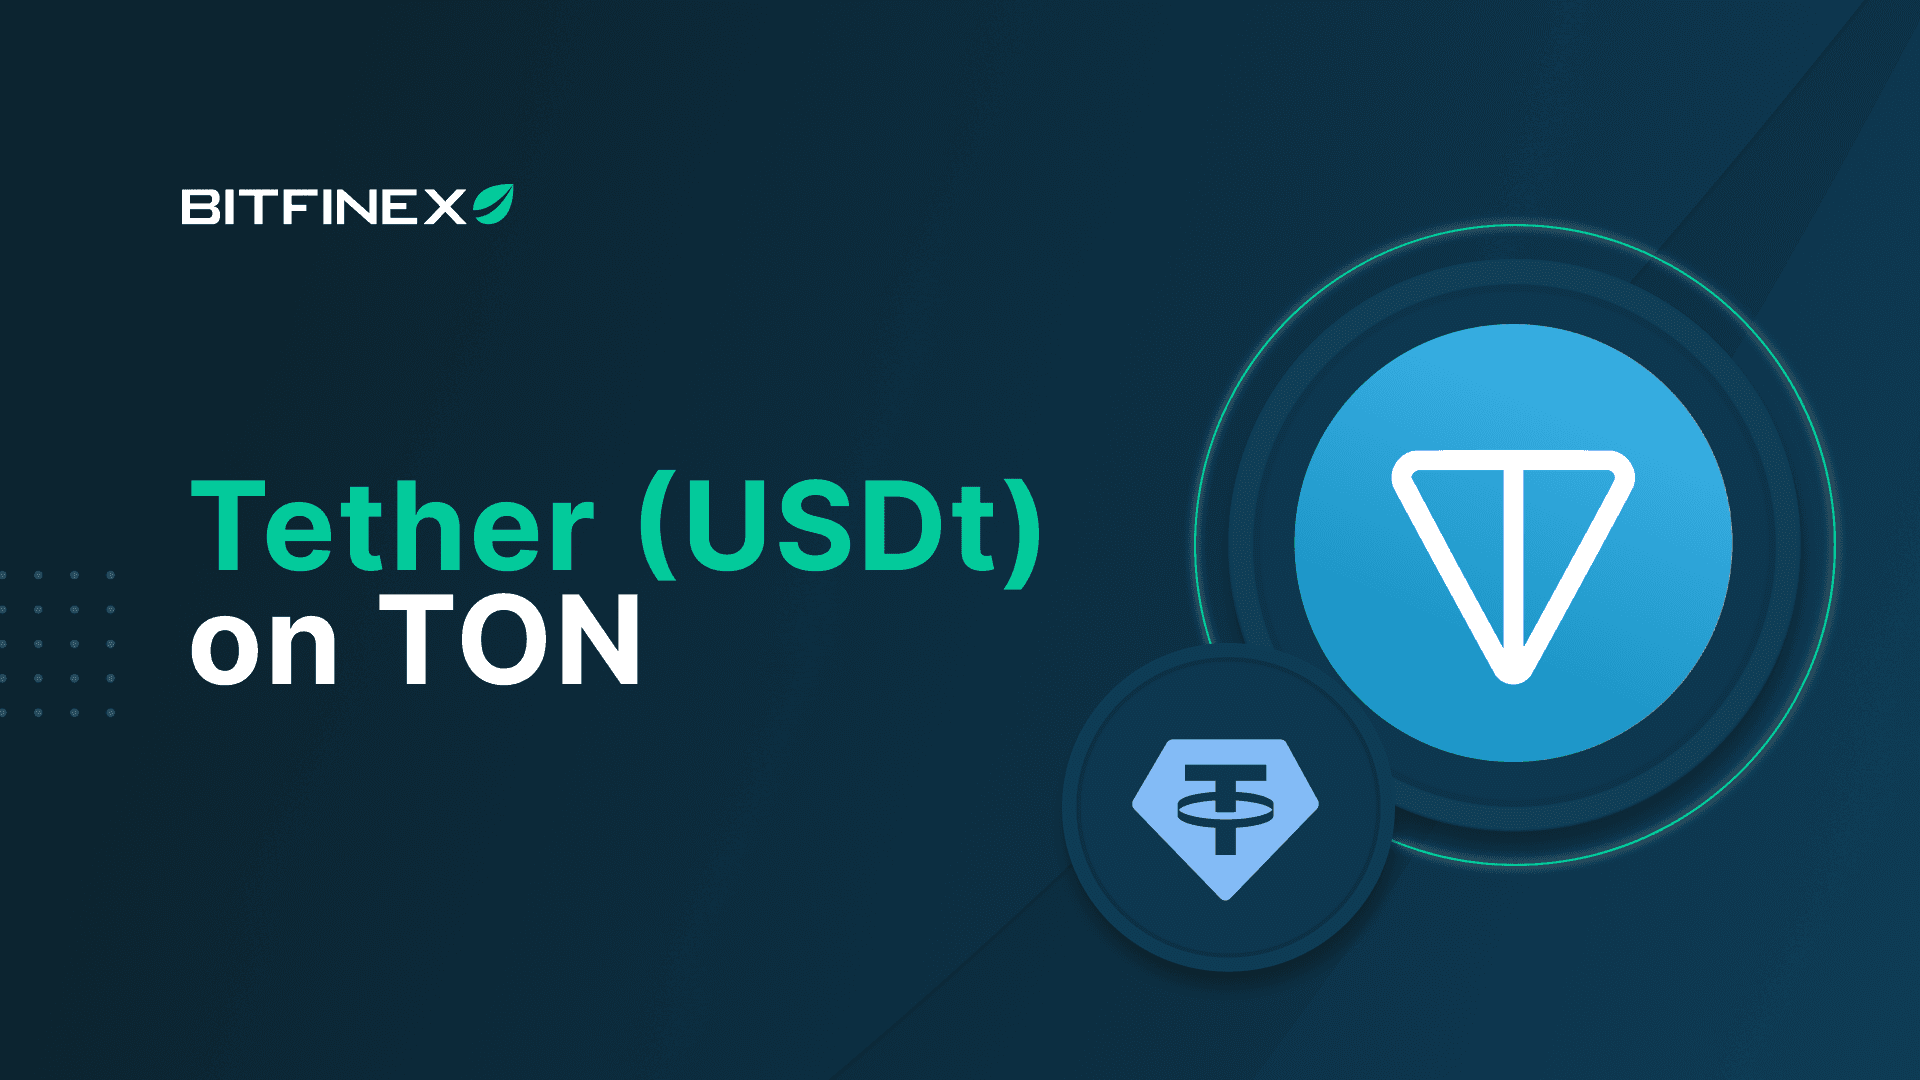 Tether (USDt) on TON Deposits & Withdrawals Available on Bitfinex